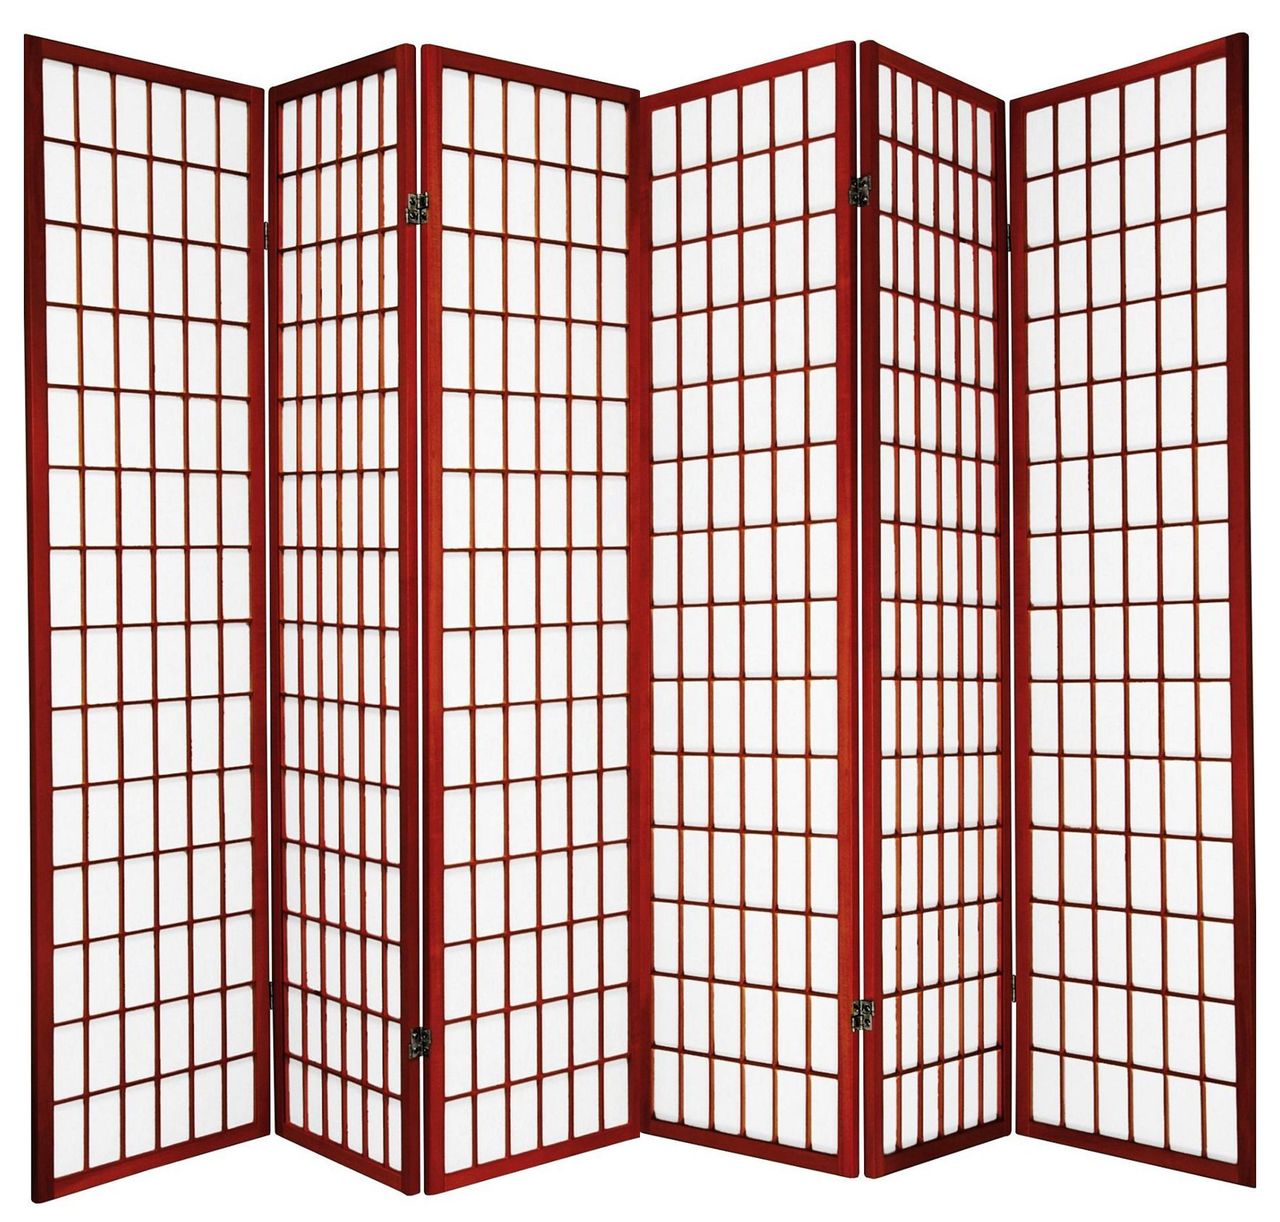 Legacy Decor Japanese Oriental 6 Panel Room Divider, 71" Tall, Cherry - image 1 of 2